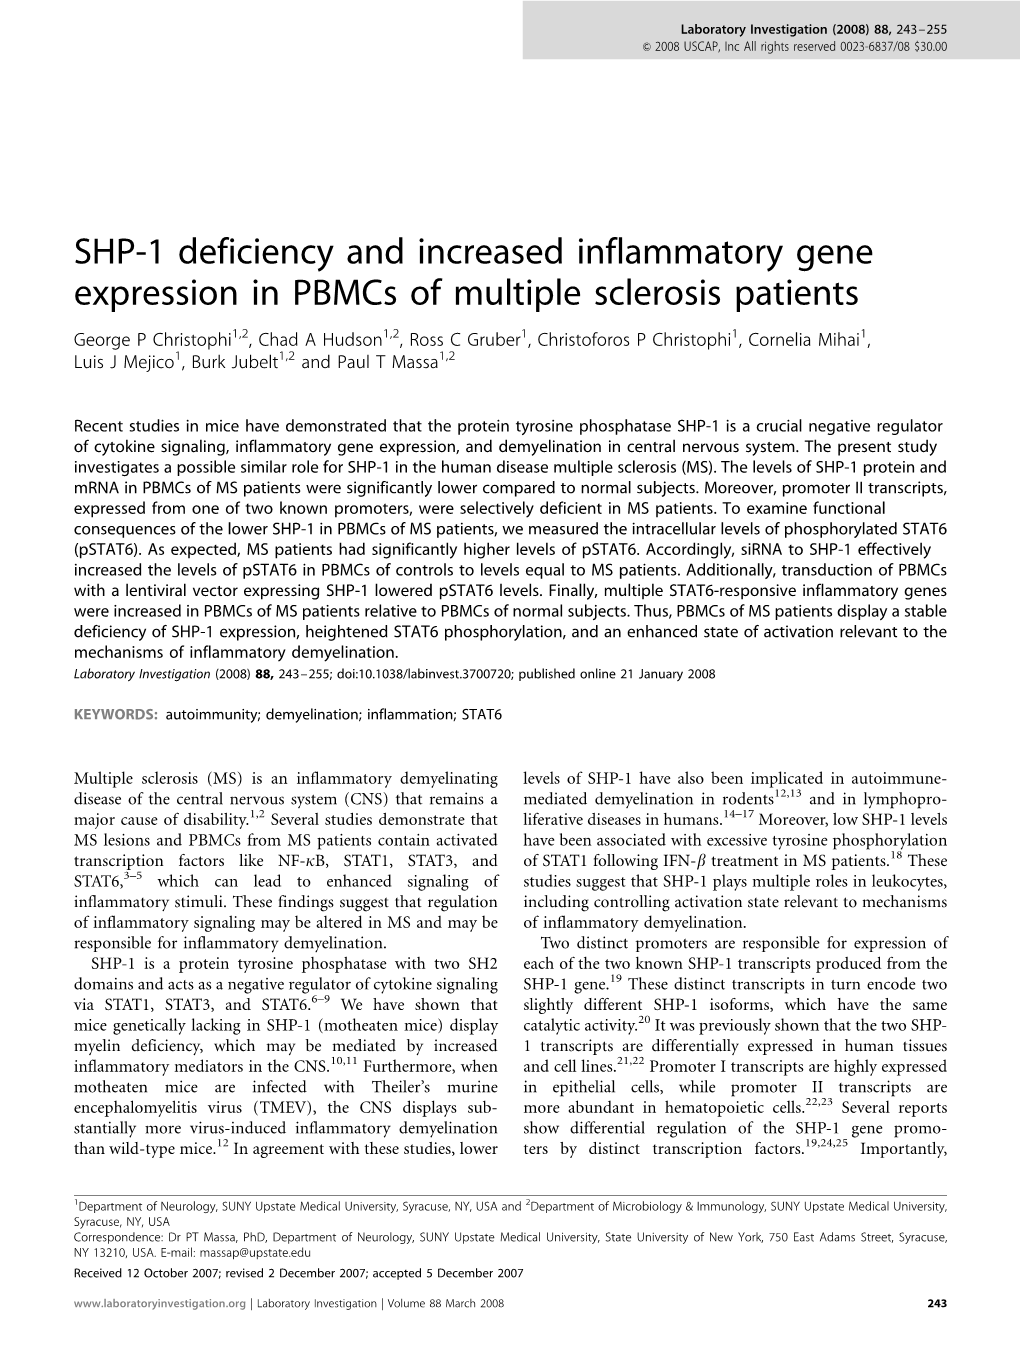 SHP-1 Deficiency and Increased Inflammatory Gene Expression In